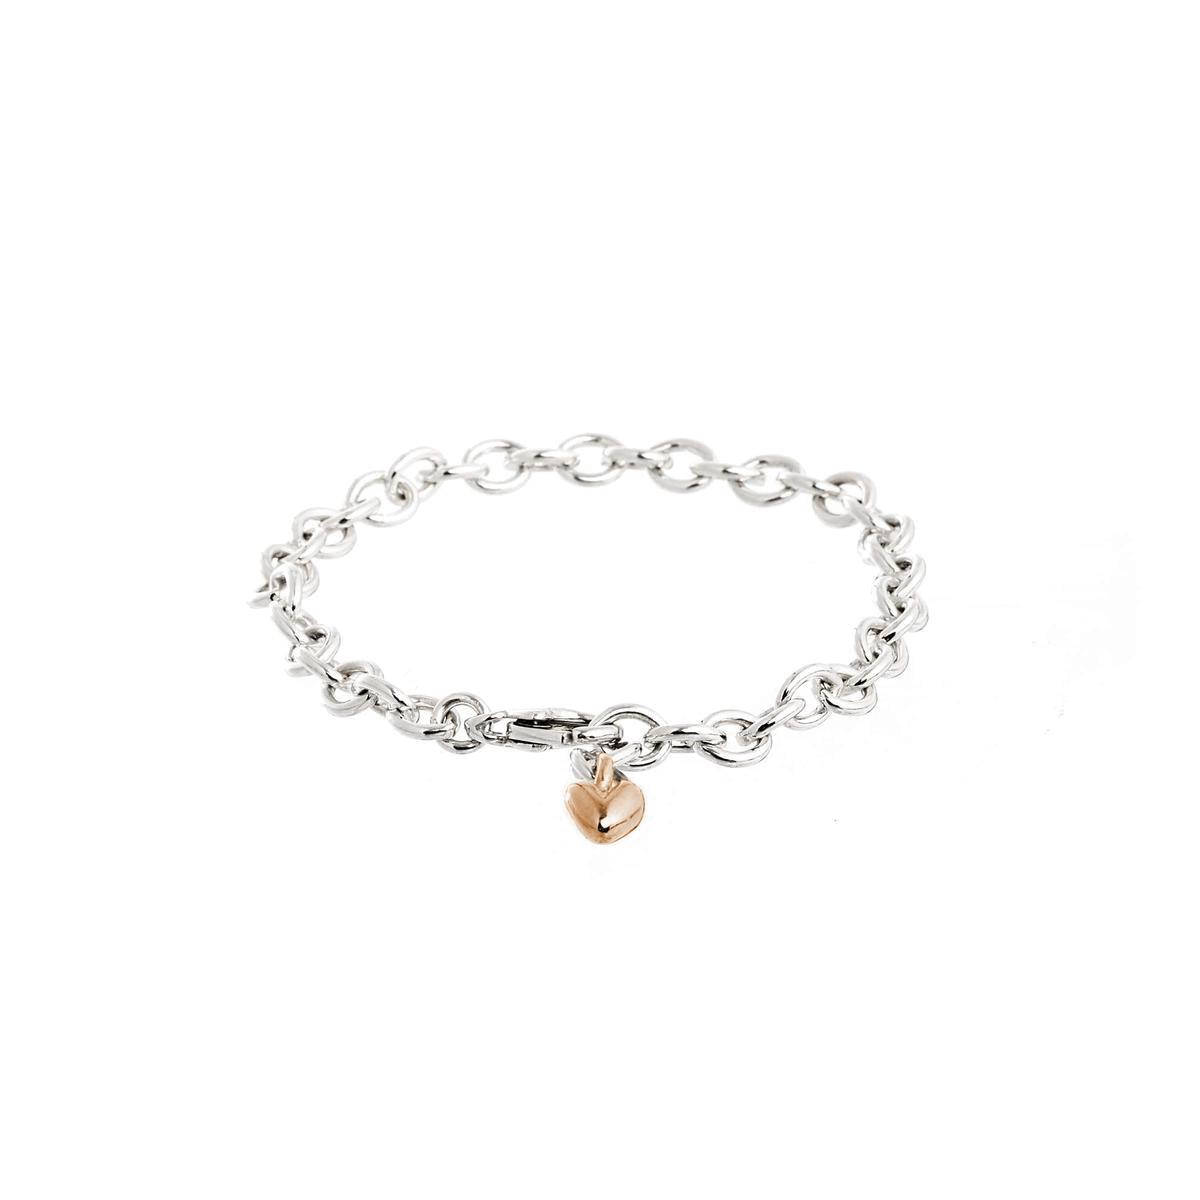 Mini Lifetime fully adjustable solid silver charm bracelet for collecting charms Scarlett Jewellery